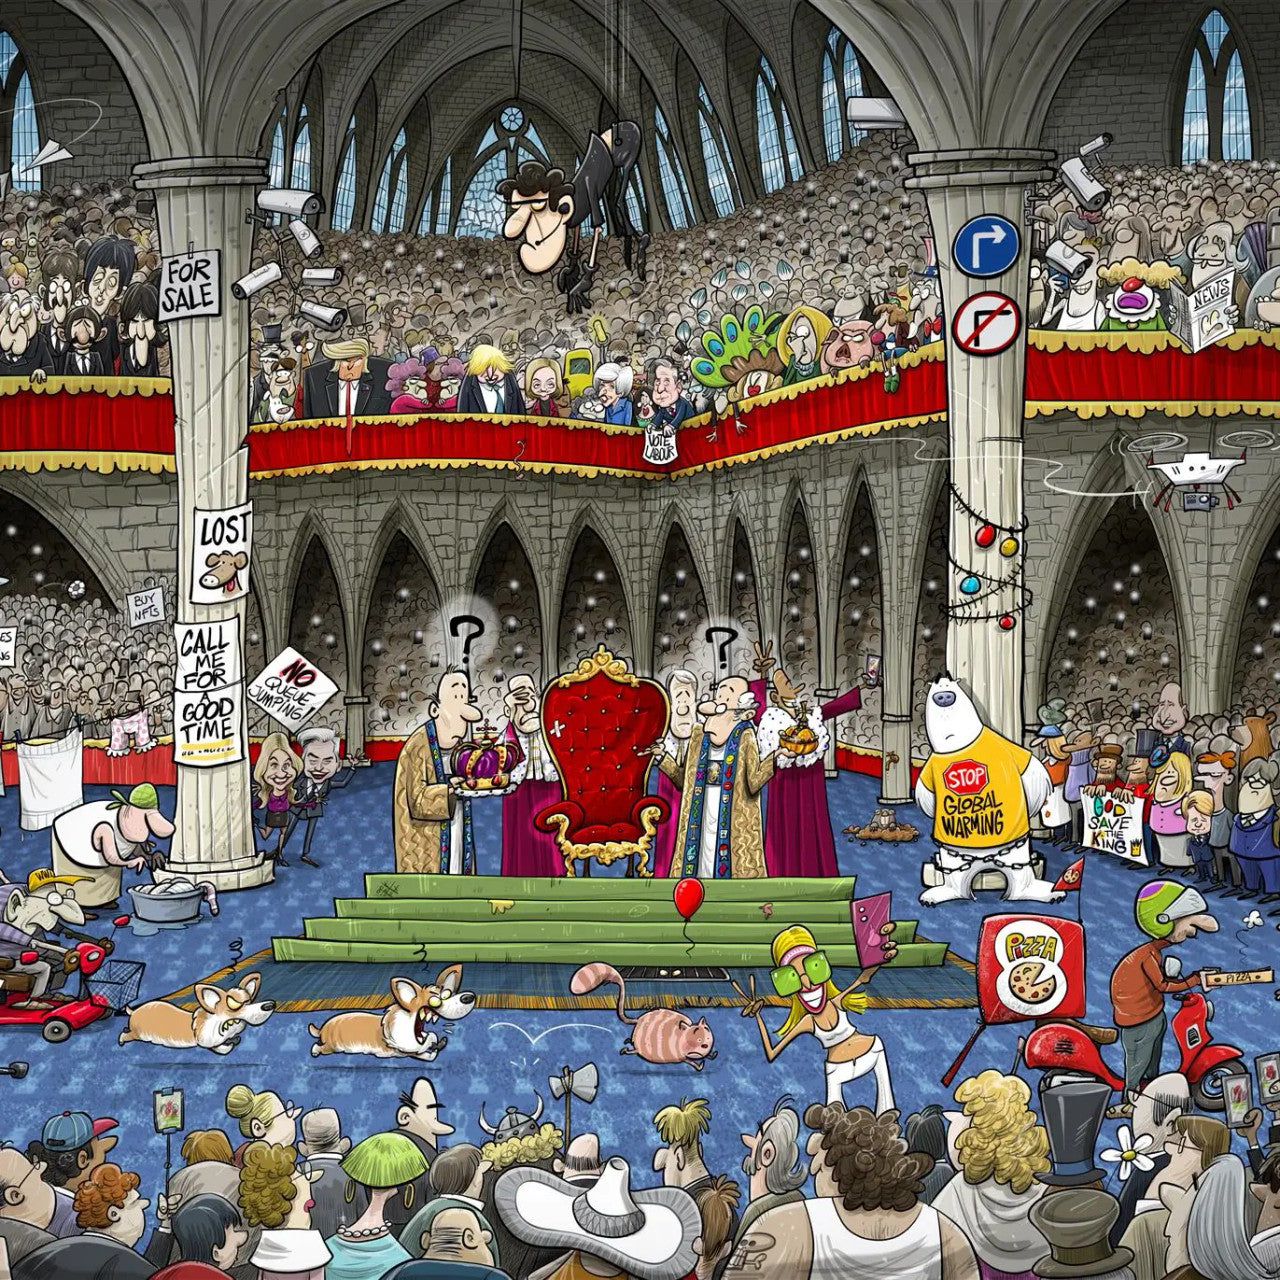 Chaos at the Coronation 1000 Piece Jigsaw Puzzle.